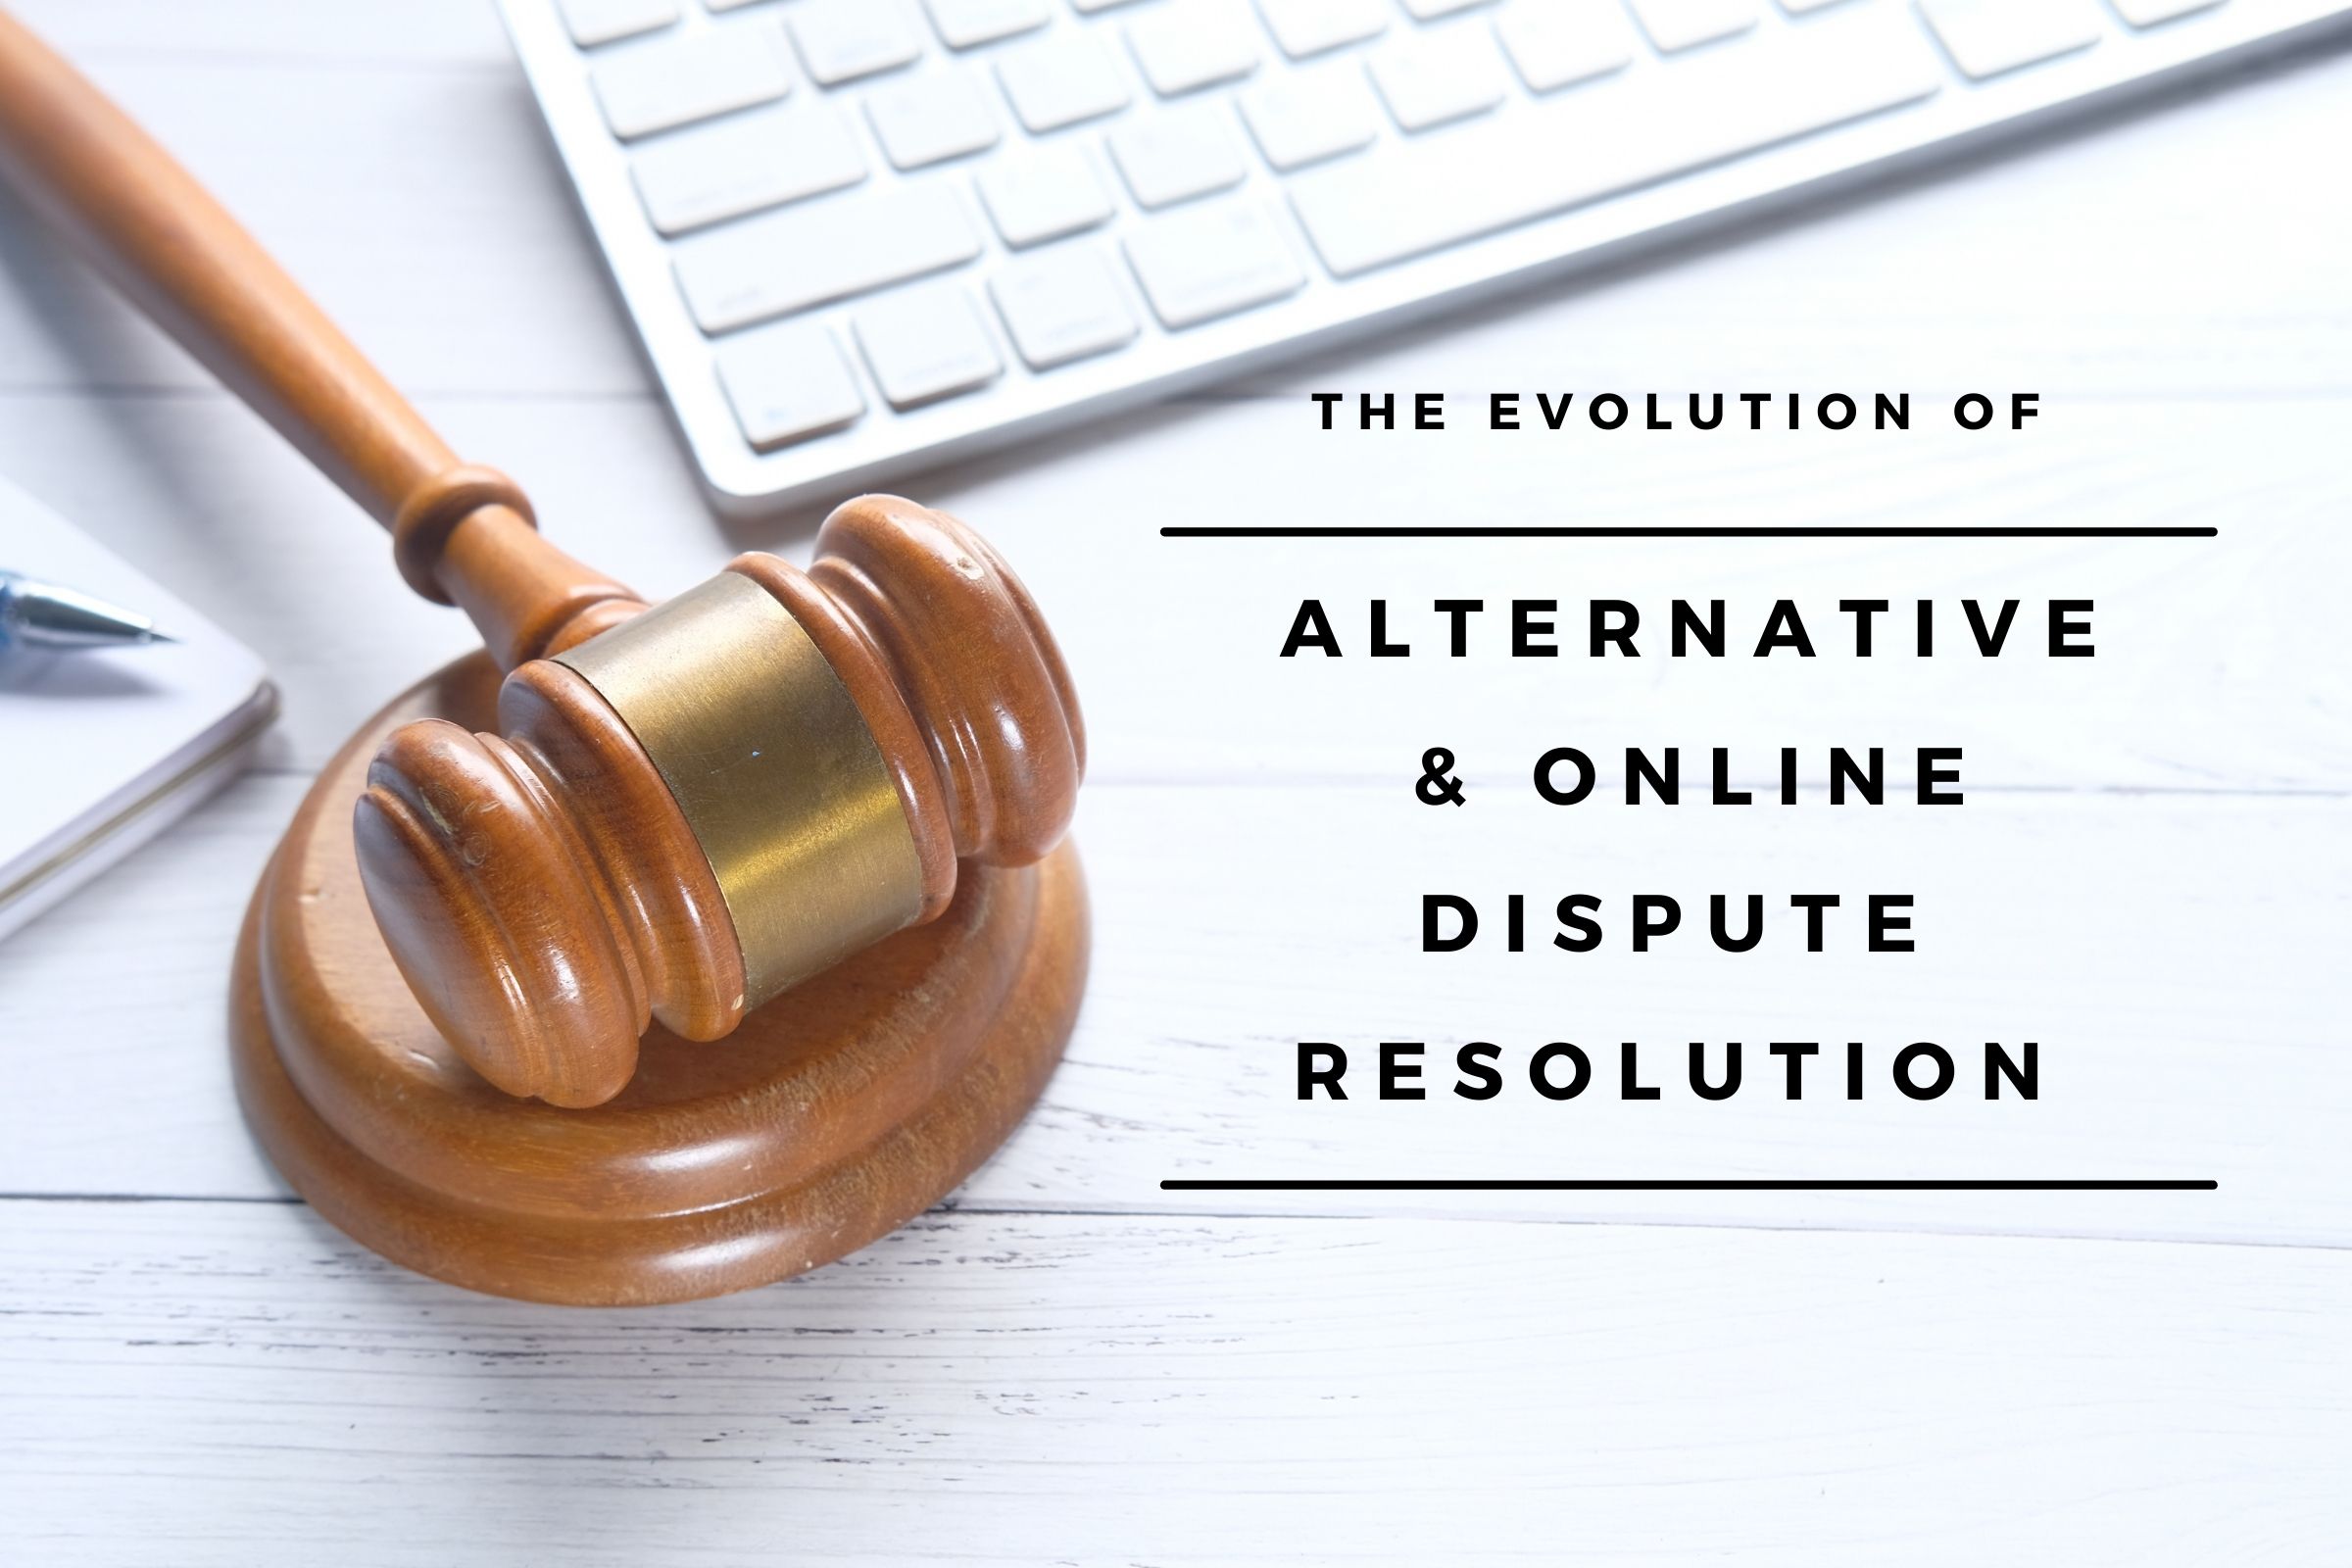 The Evolution of Alternative and Online Dispute Resolution